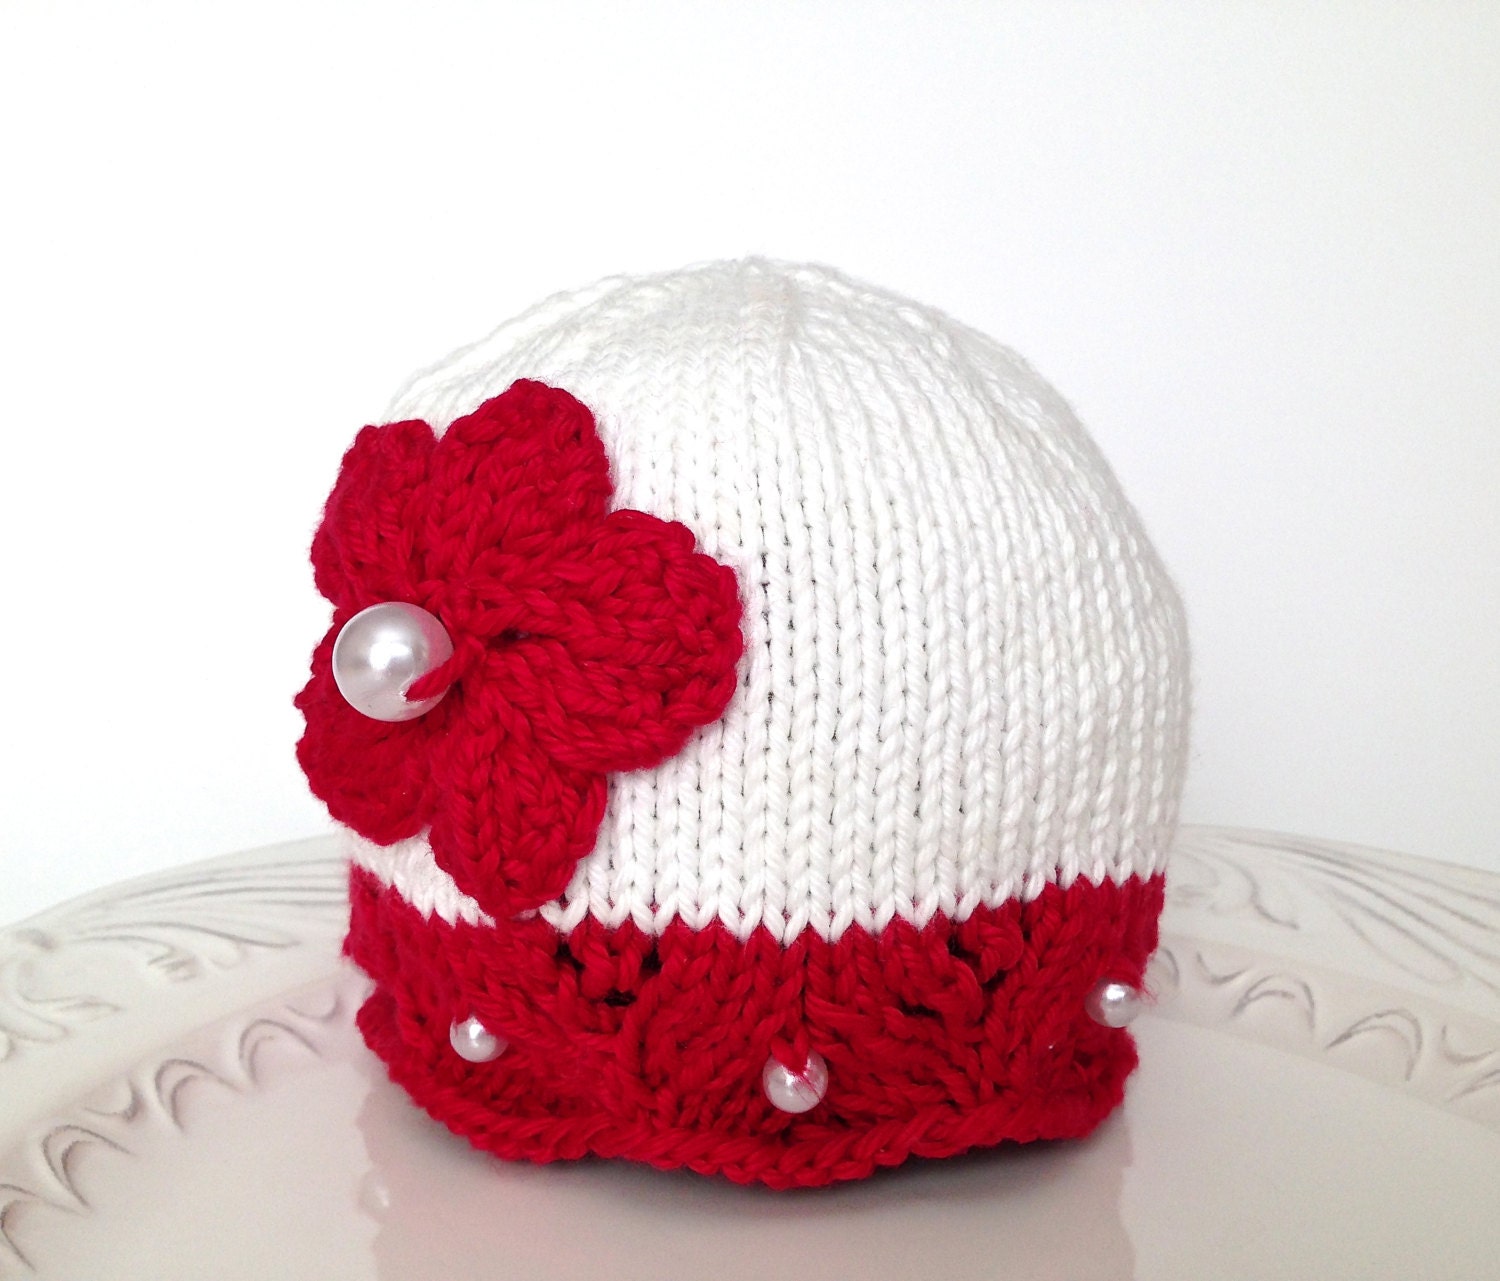 Knitted hat for baby 0-3 months, white and red, Christmas hat - TinyLoveGifts